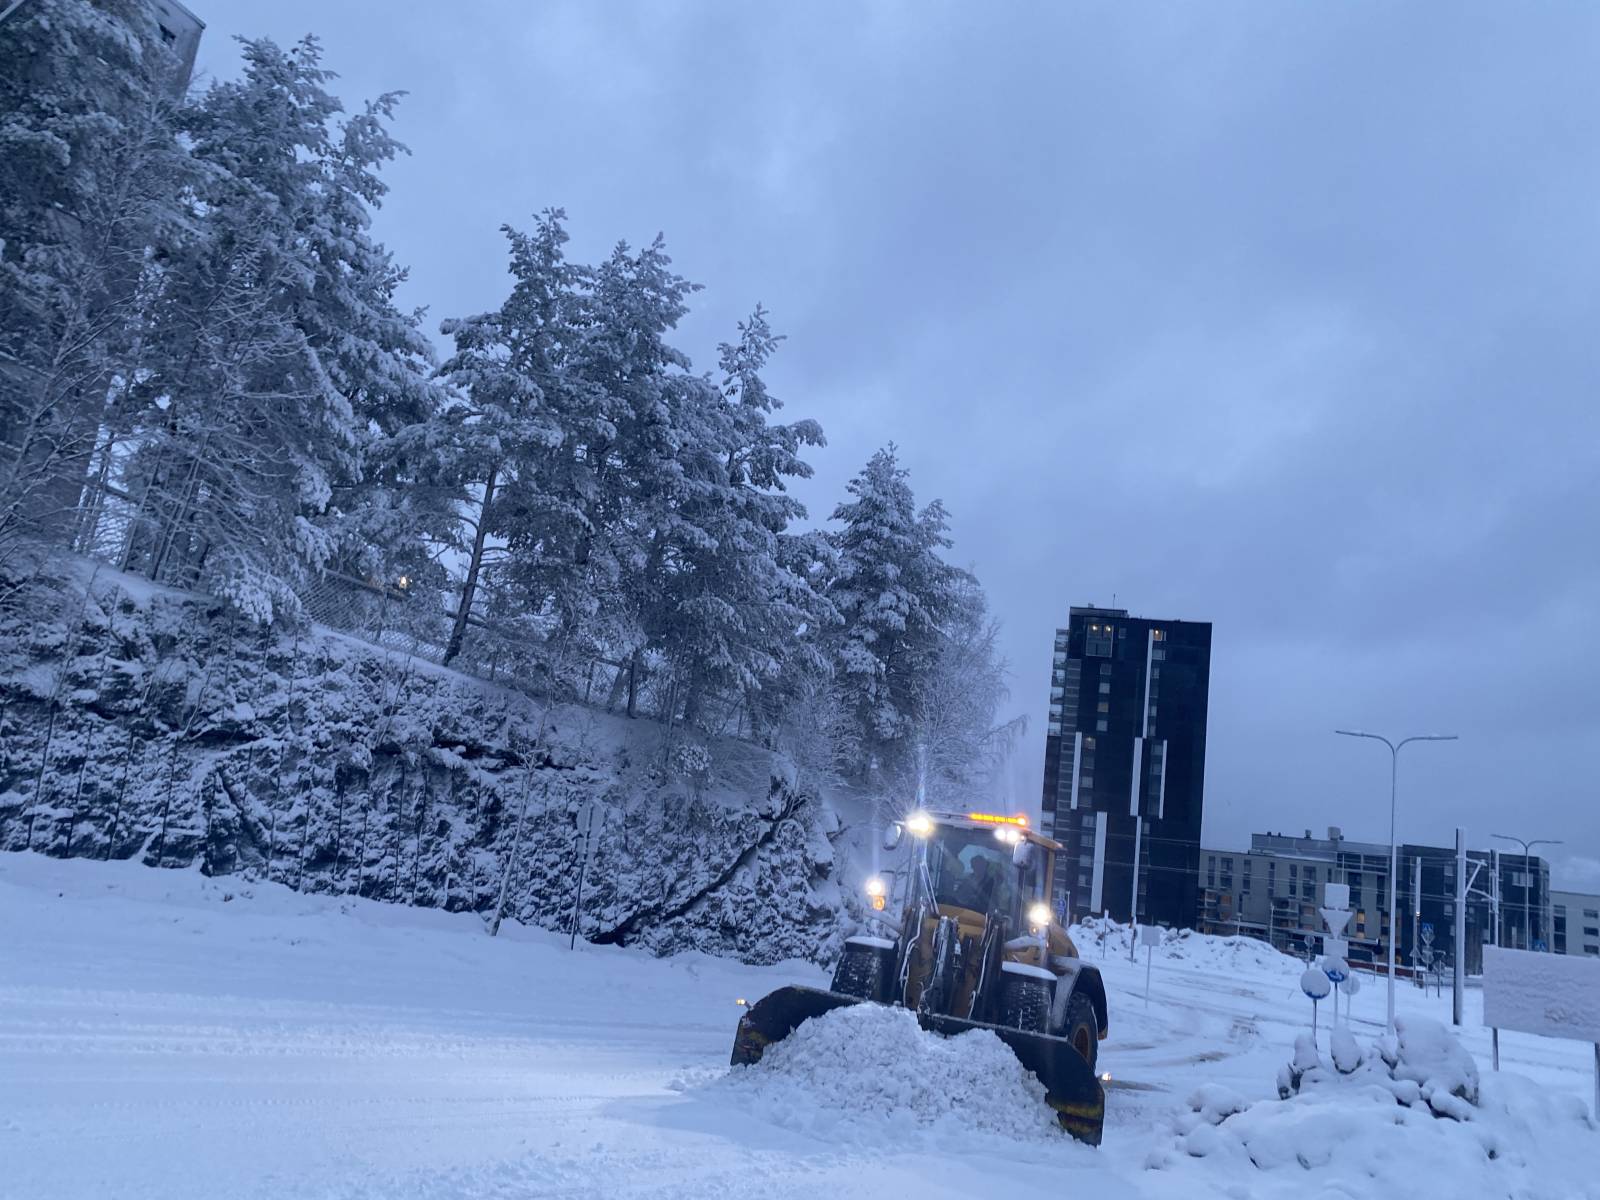 A snowy winter in Tampere with a tractor clearing the snow for more car accessibility